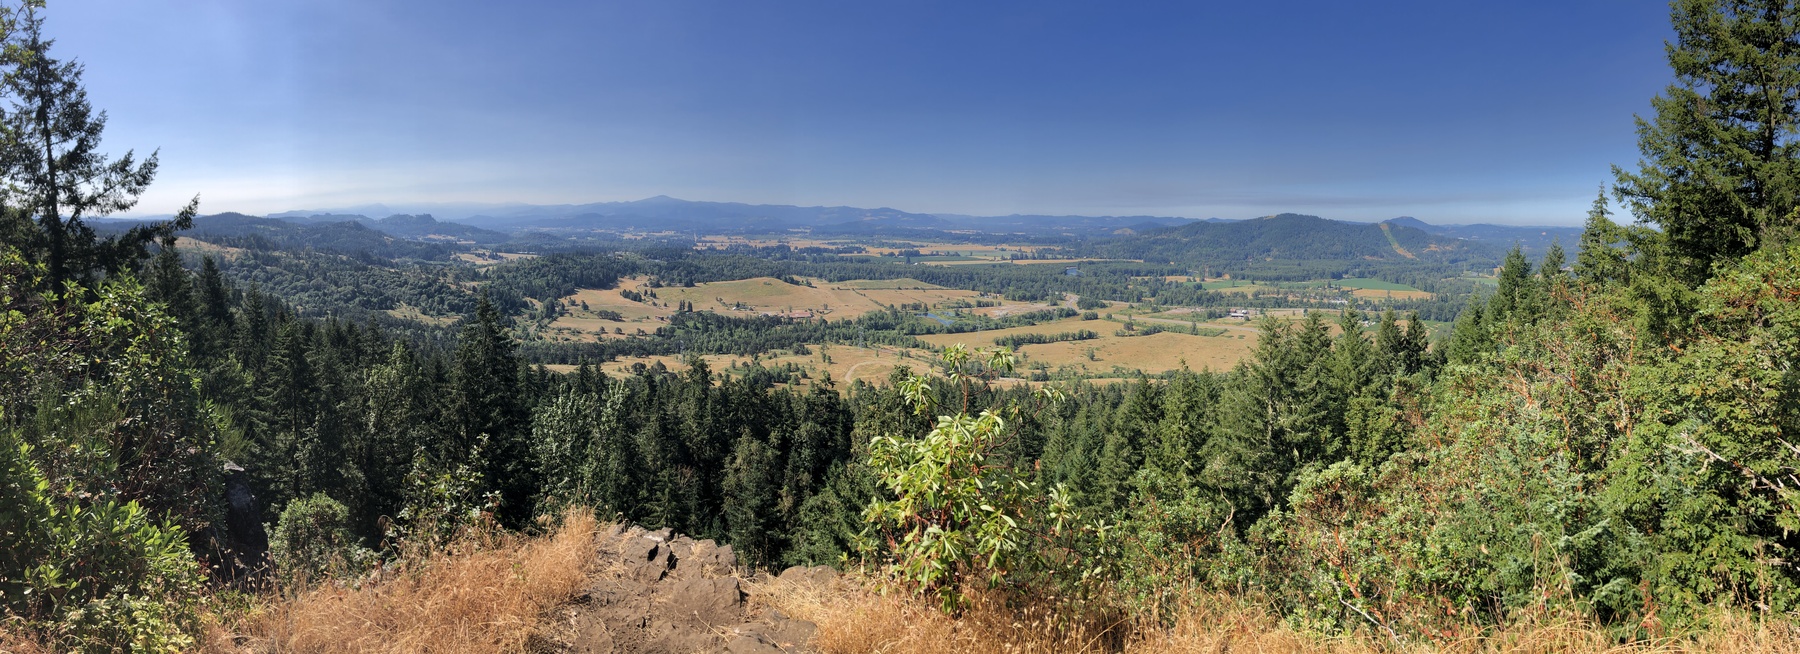 Viewpoint from top of Thurston Hills overlooking fields, trees, and mountains in the distance